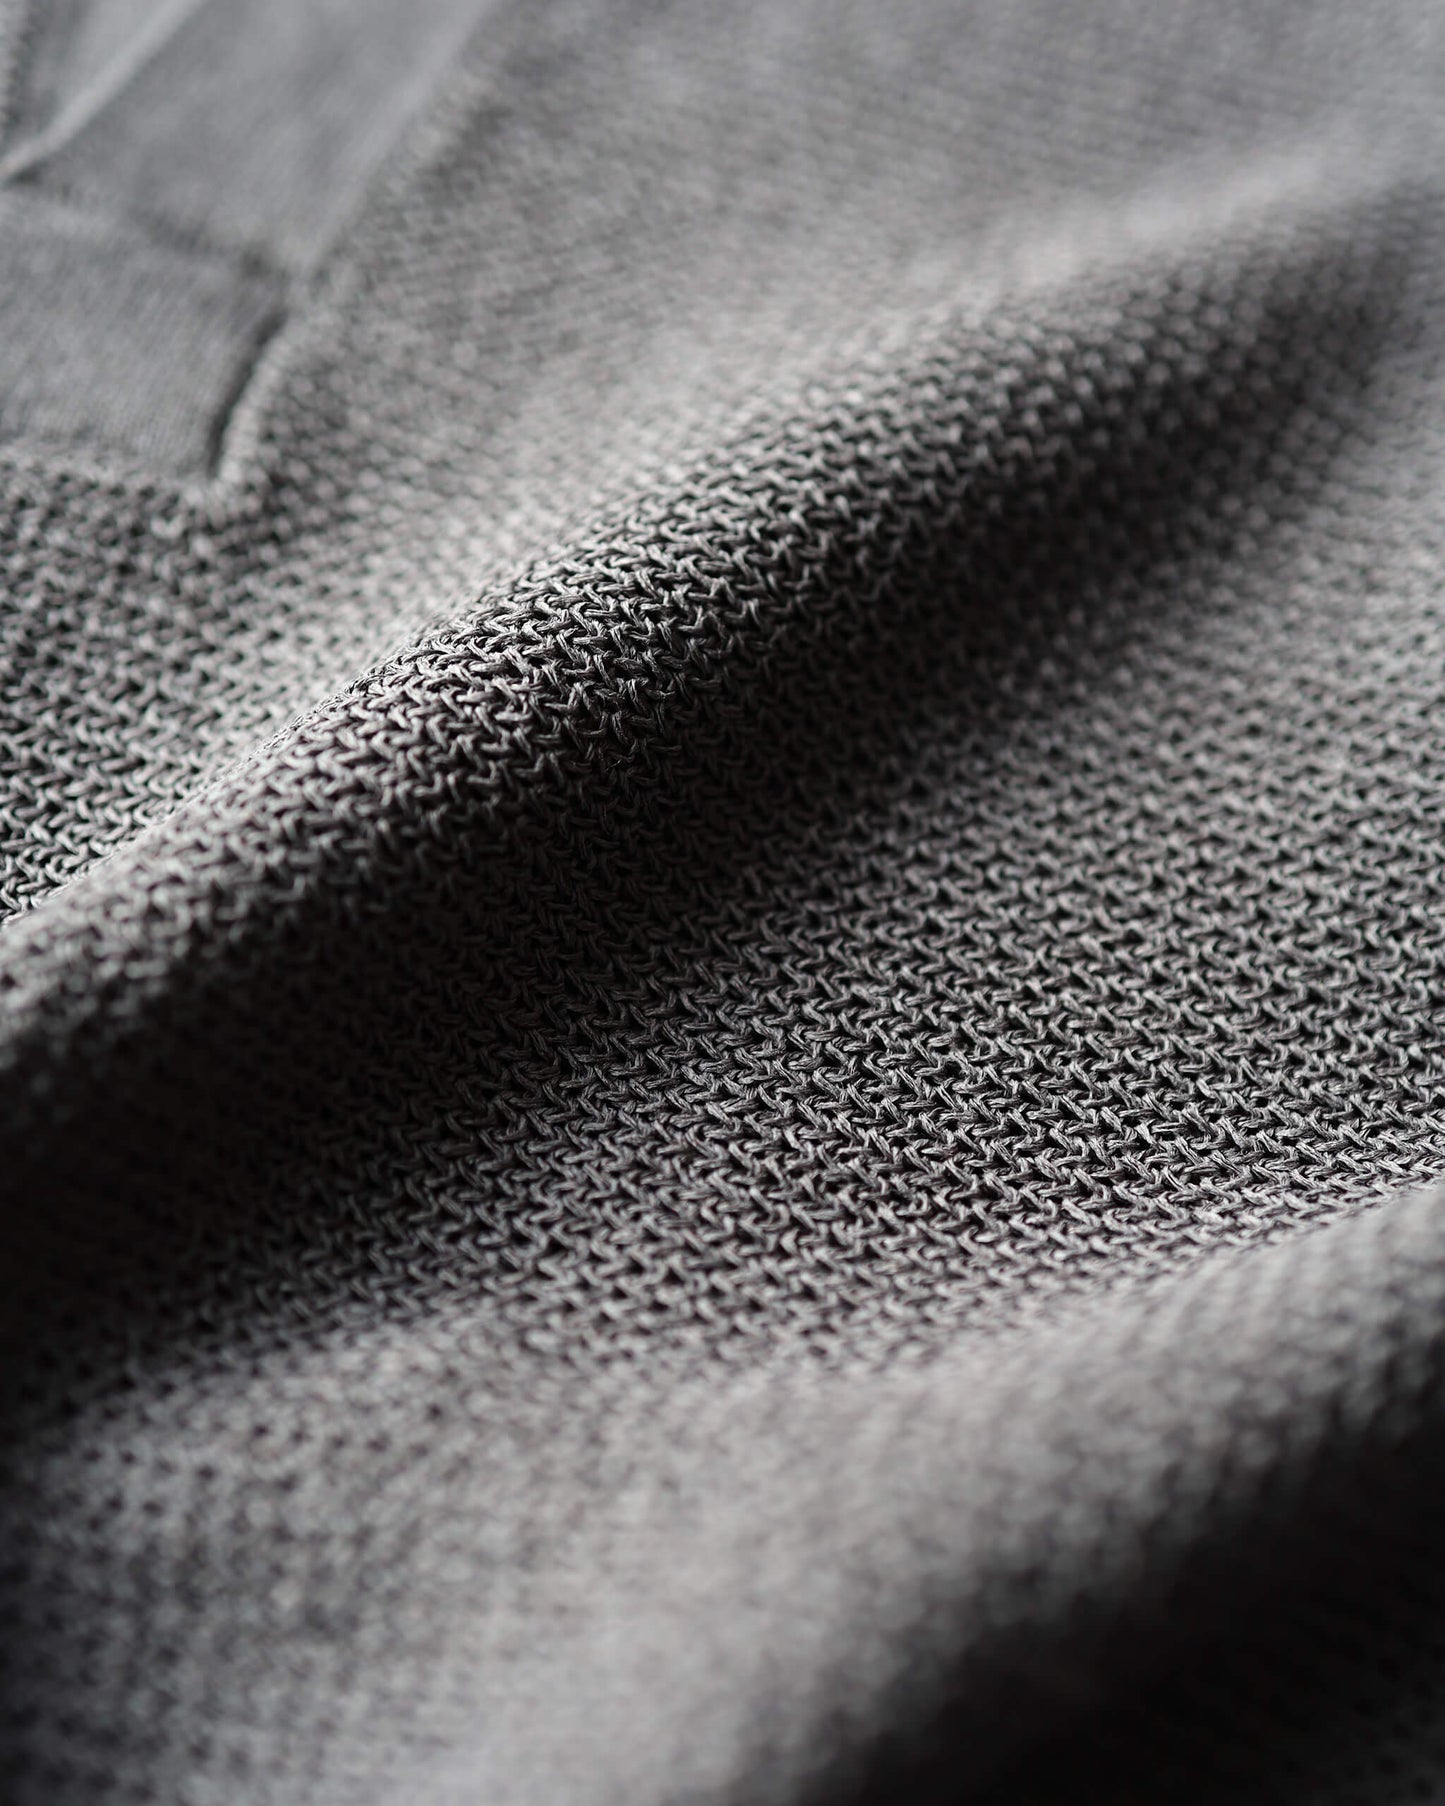 Paper & Recycled polyester Skipper knit wear "Grey"